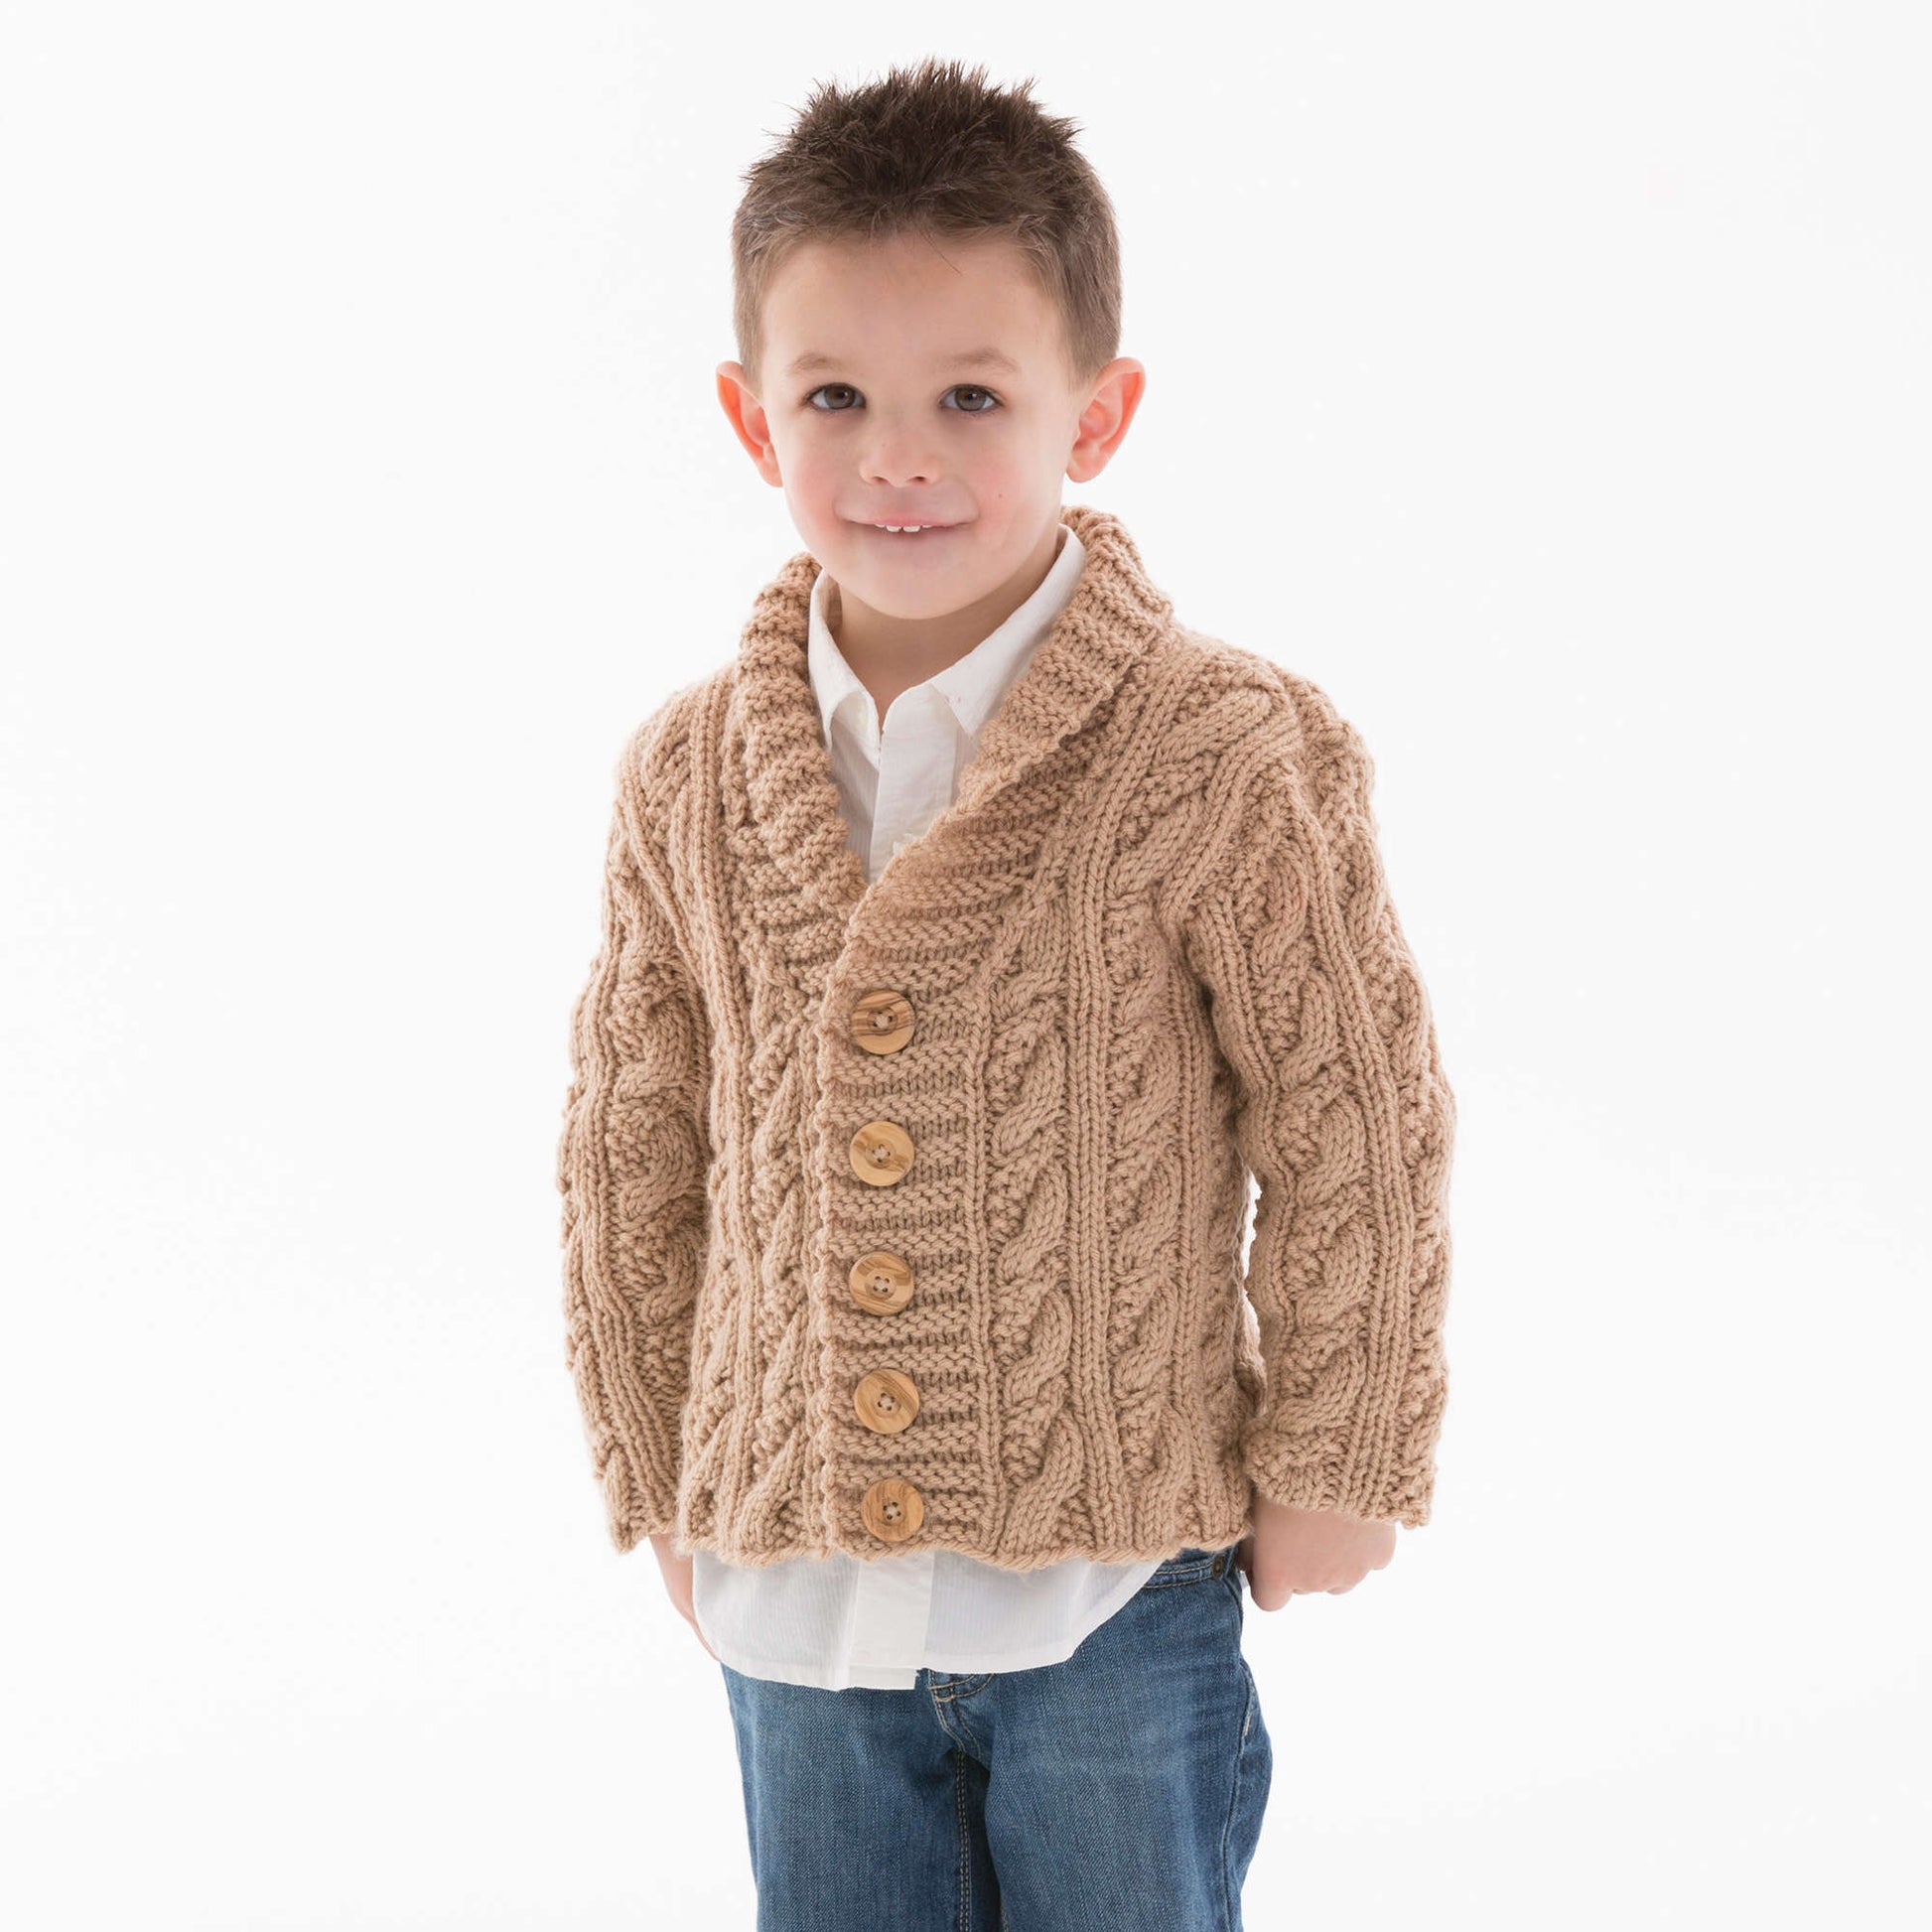 Free Red Heart Little Man Cable Knit Cardigan Pattern